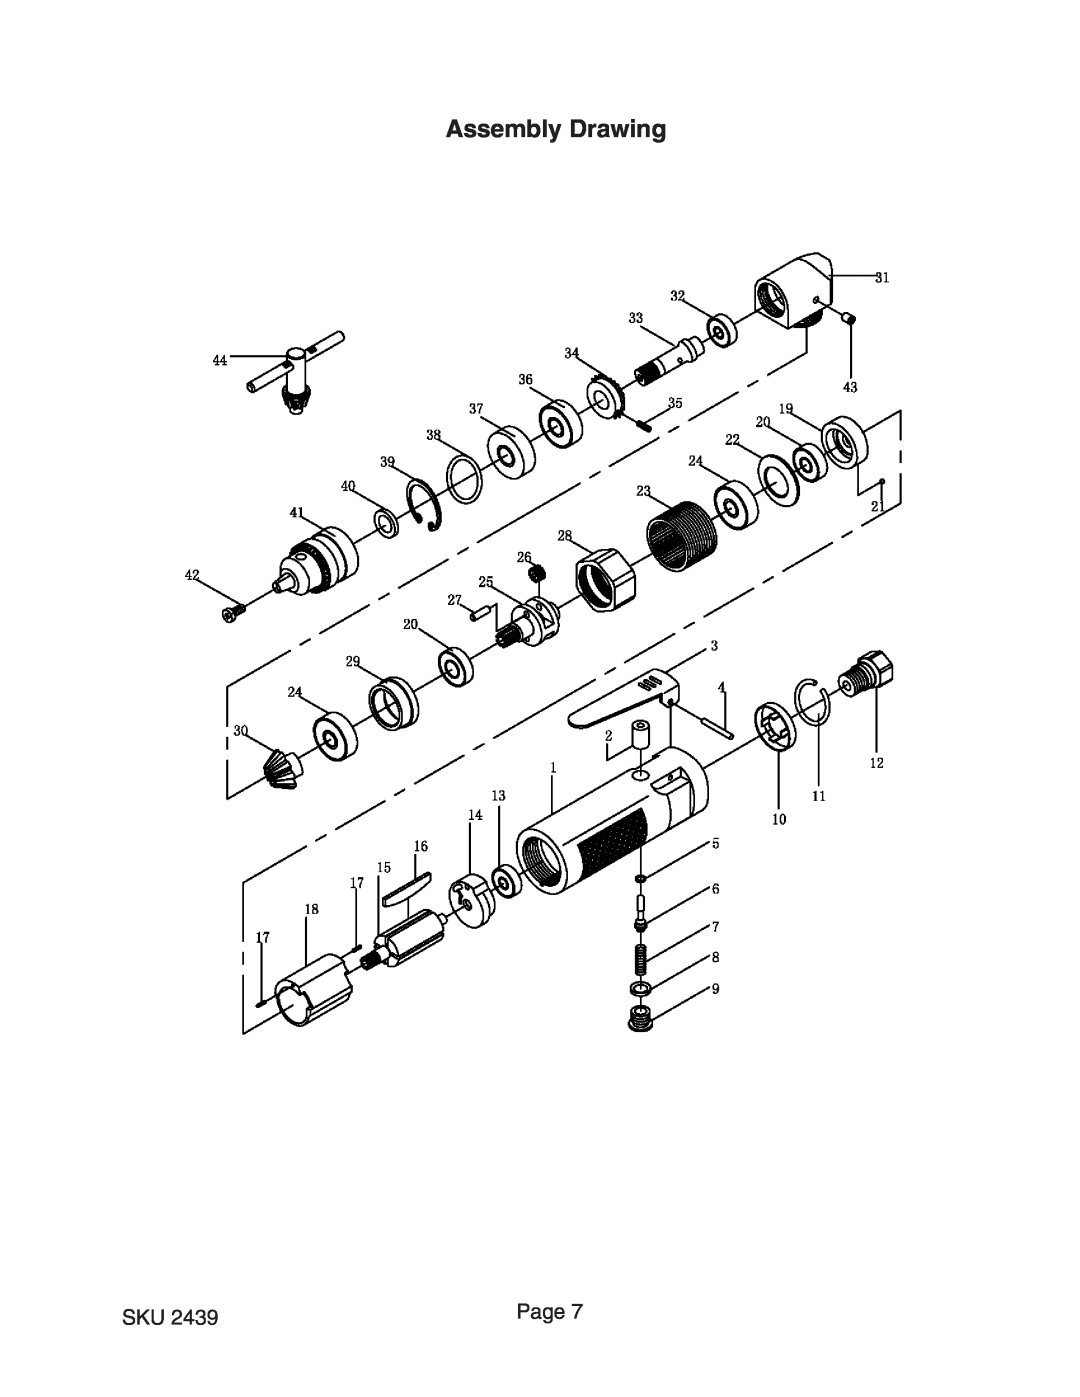 Harbor Freight Tools 2439 operating instructions Assembly Drawing, Page 